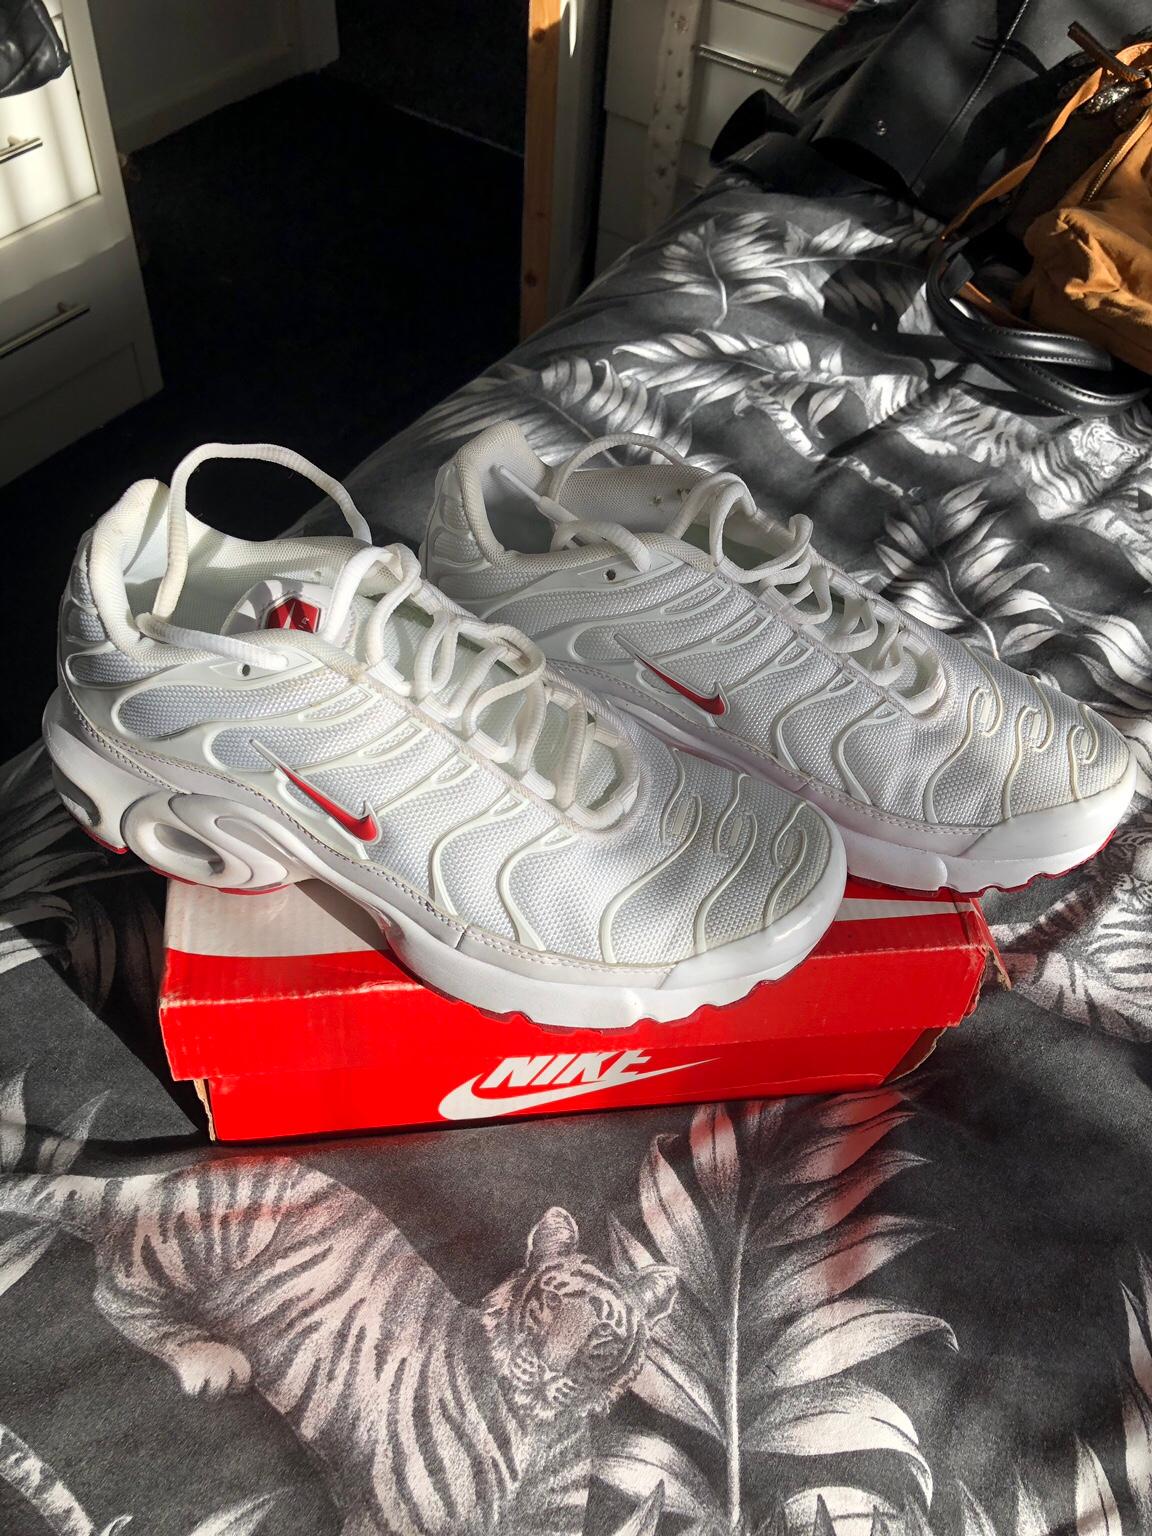 White/ red tns uk 5.5 in B63 Dudley for 